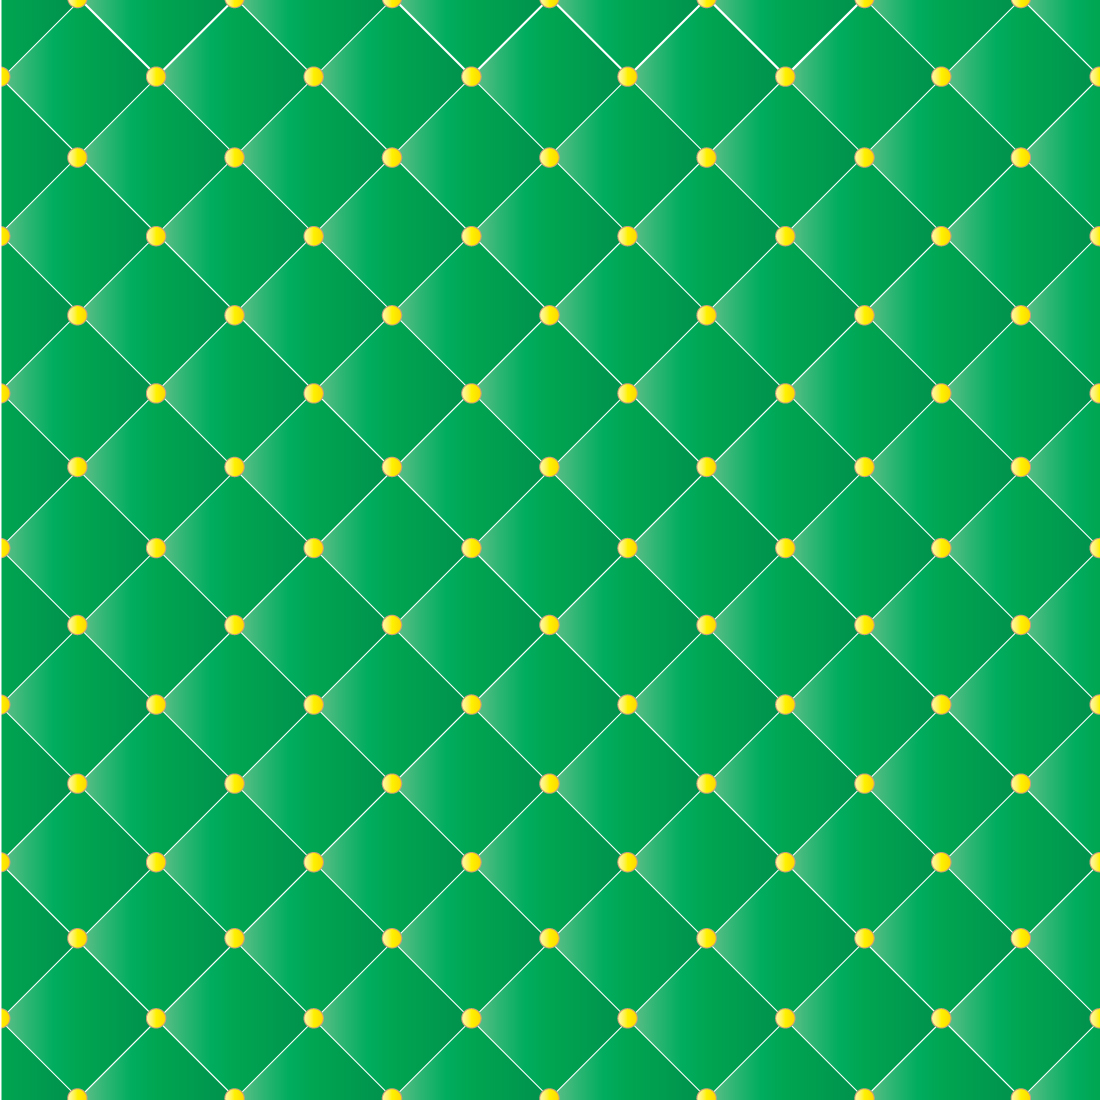 gradient green squares yellow circles white lines pattern background 94